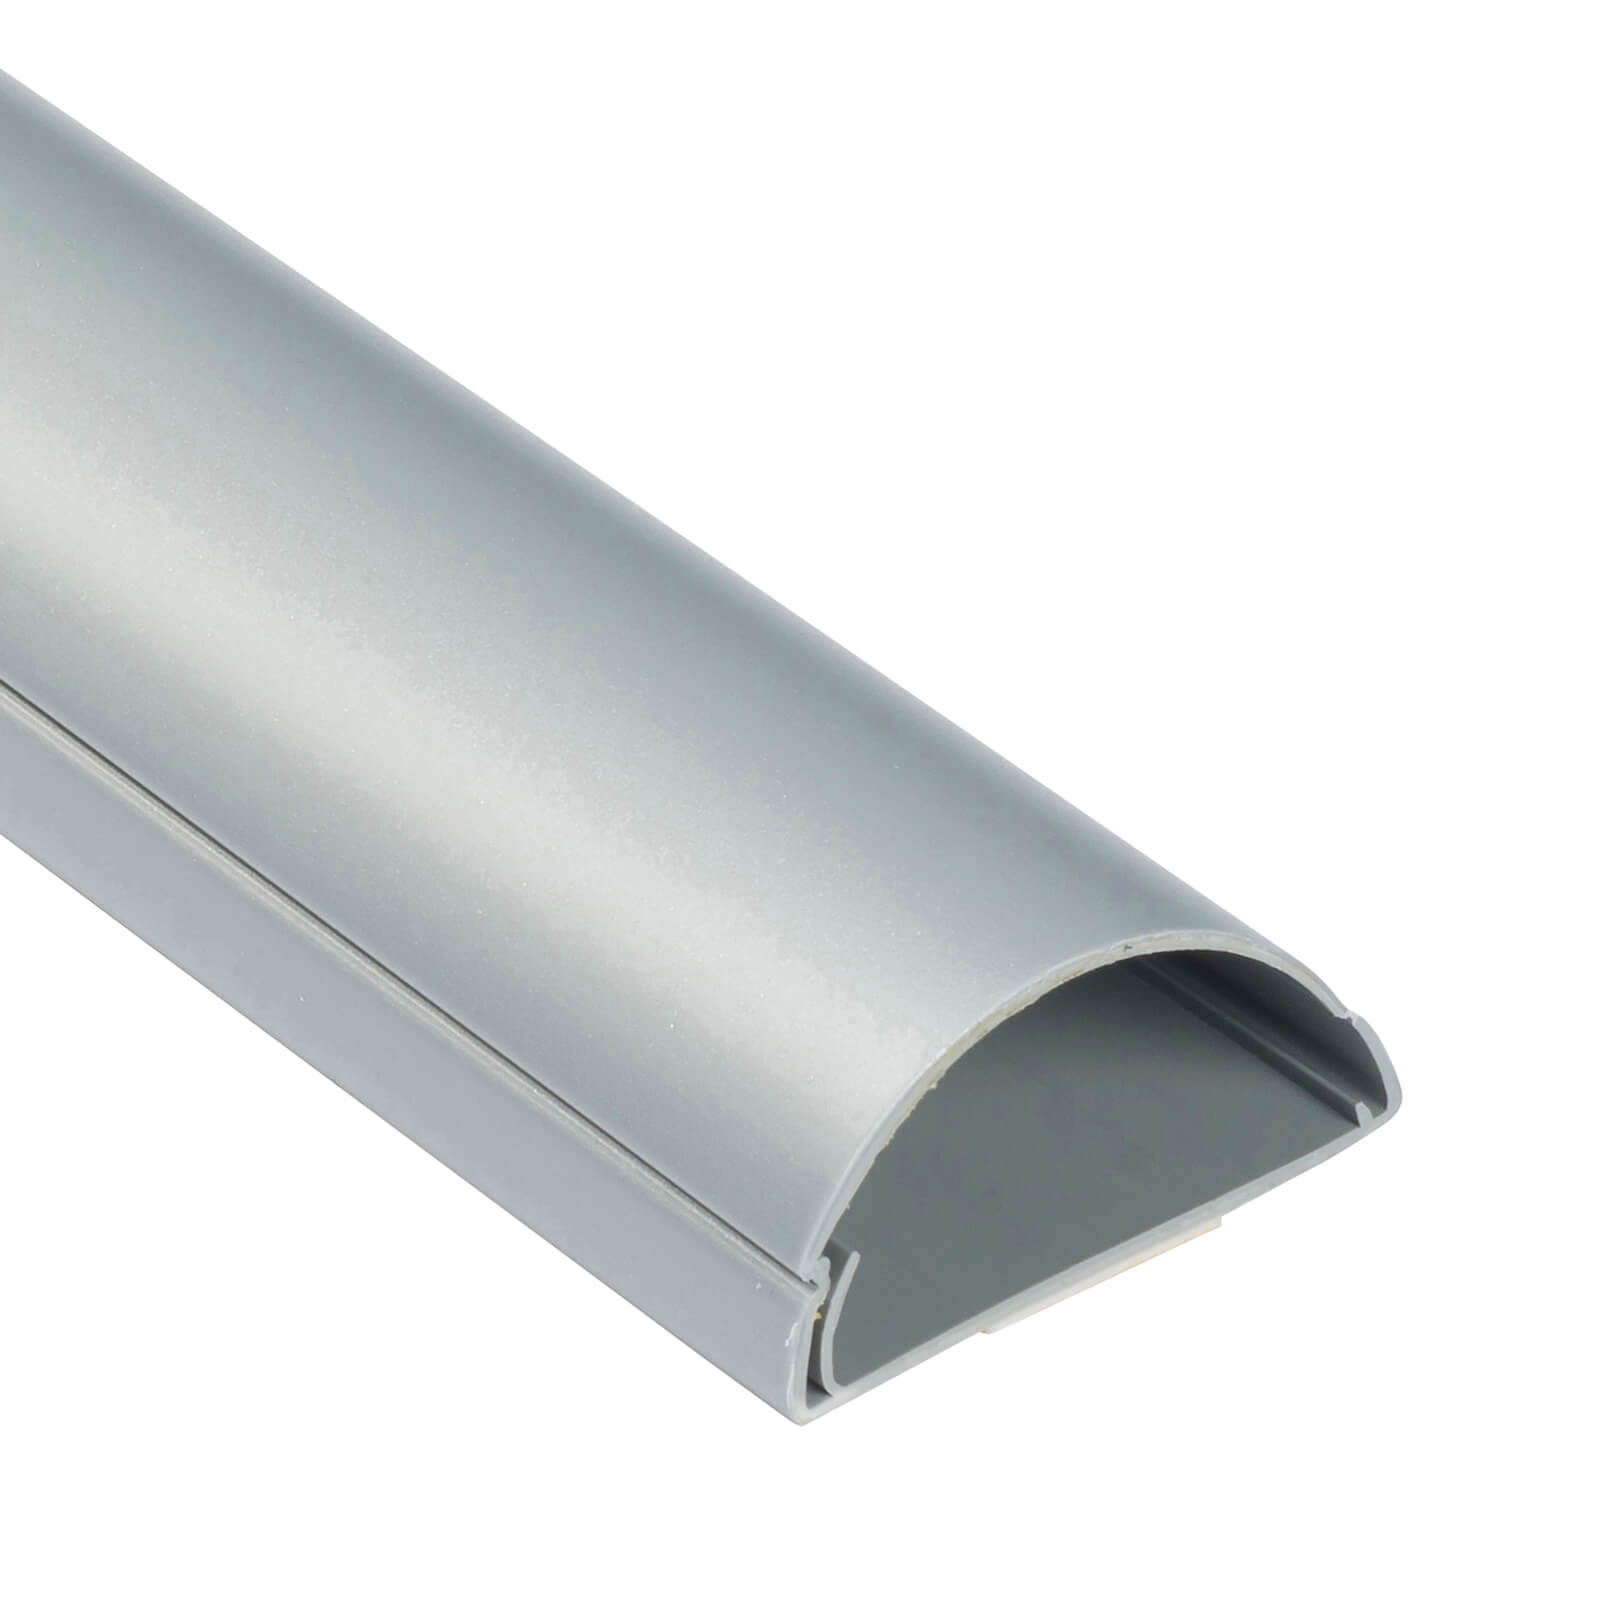 Photo of D-line Maxi Decorative Self-adhesive Cable Trunking - 50mm X 25mm X 1m- Aluminium-effect